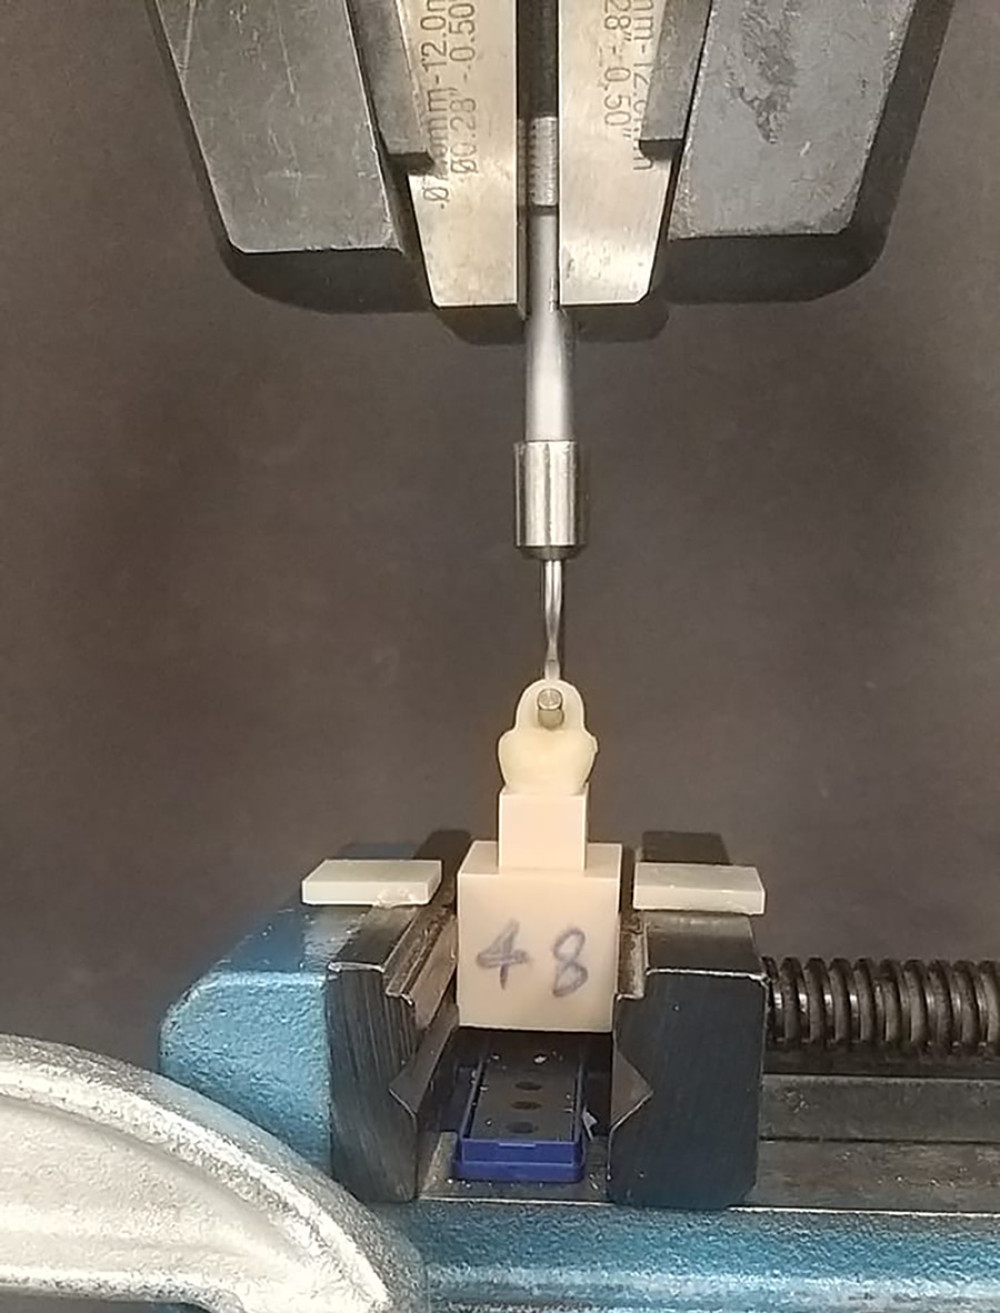 Universal testing machine showing engagement of the test samples for the pull-off test with handles of the provisional crowns aligned to engage the sample handle perpendicular to the line of direction of pulling force. Photograph taken using a digital single-lens reflex (DSLR) camera (Canon EOS 700D) with 100 mm macro lens) with/without ring flash.